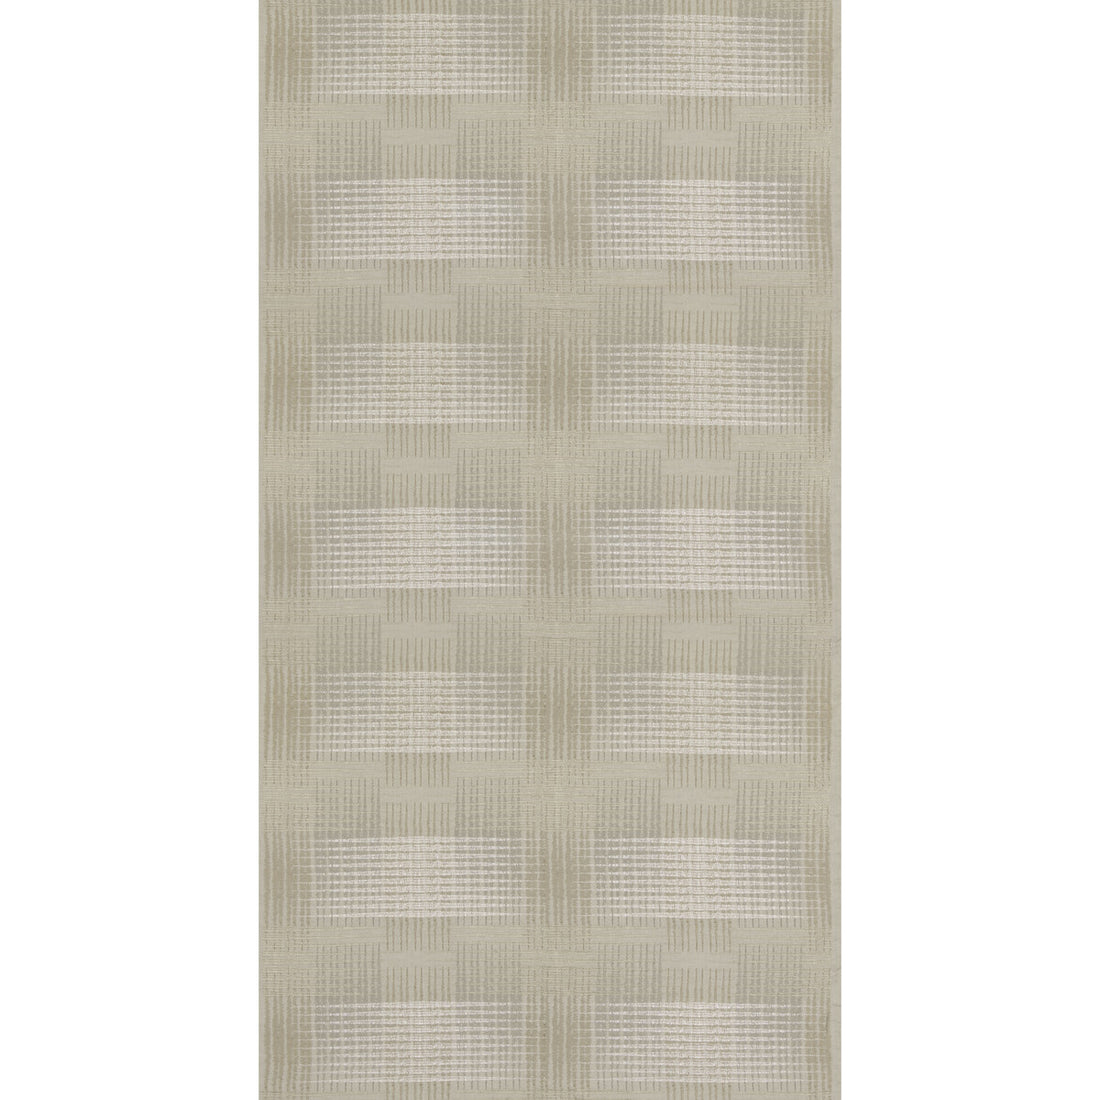 Braganza fabric in linen color - pattern ED85363.110.0 - by Threads in the Faraway collection